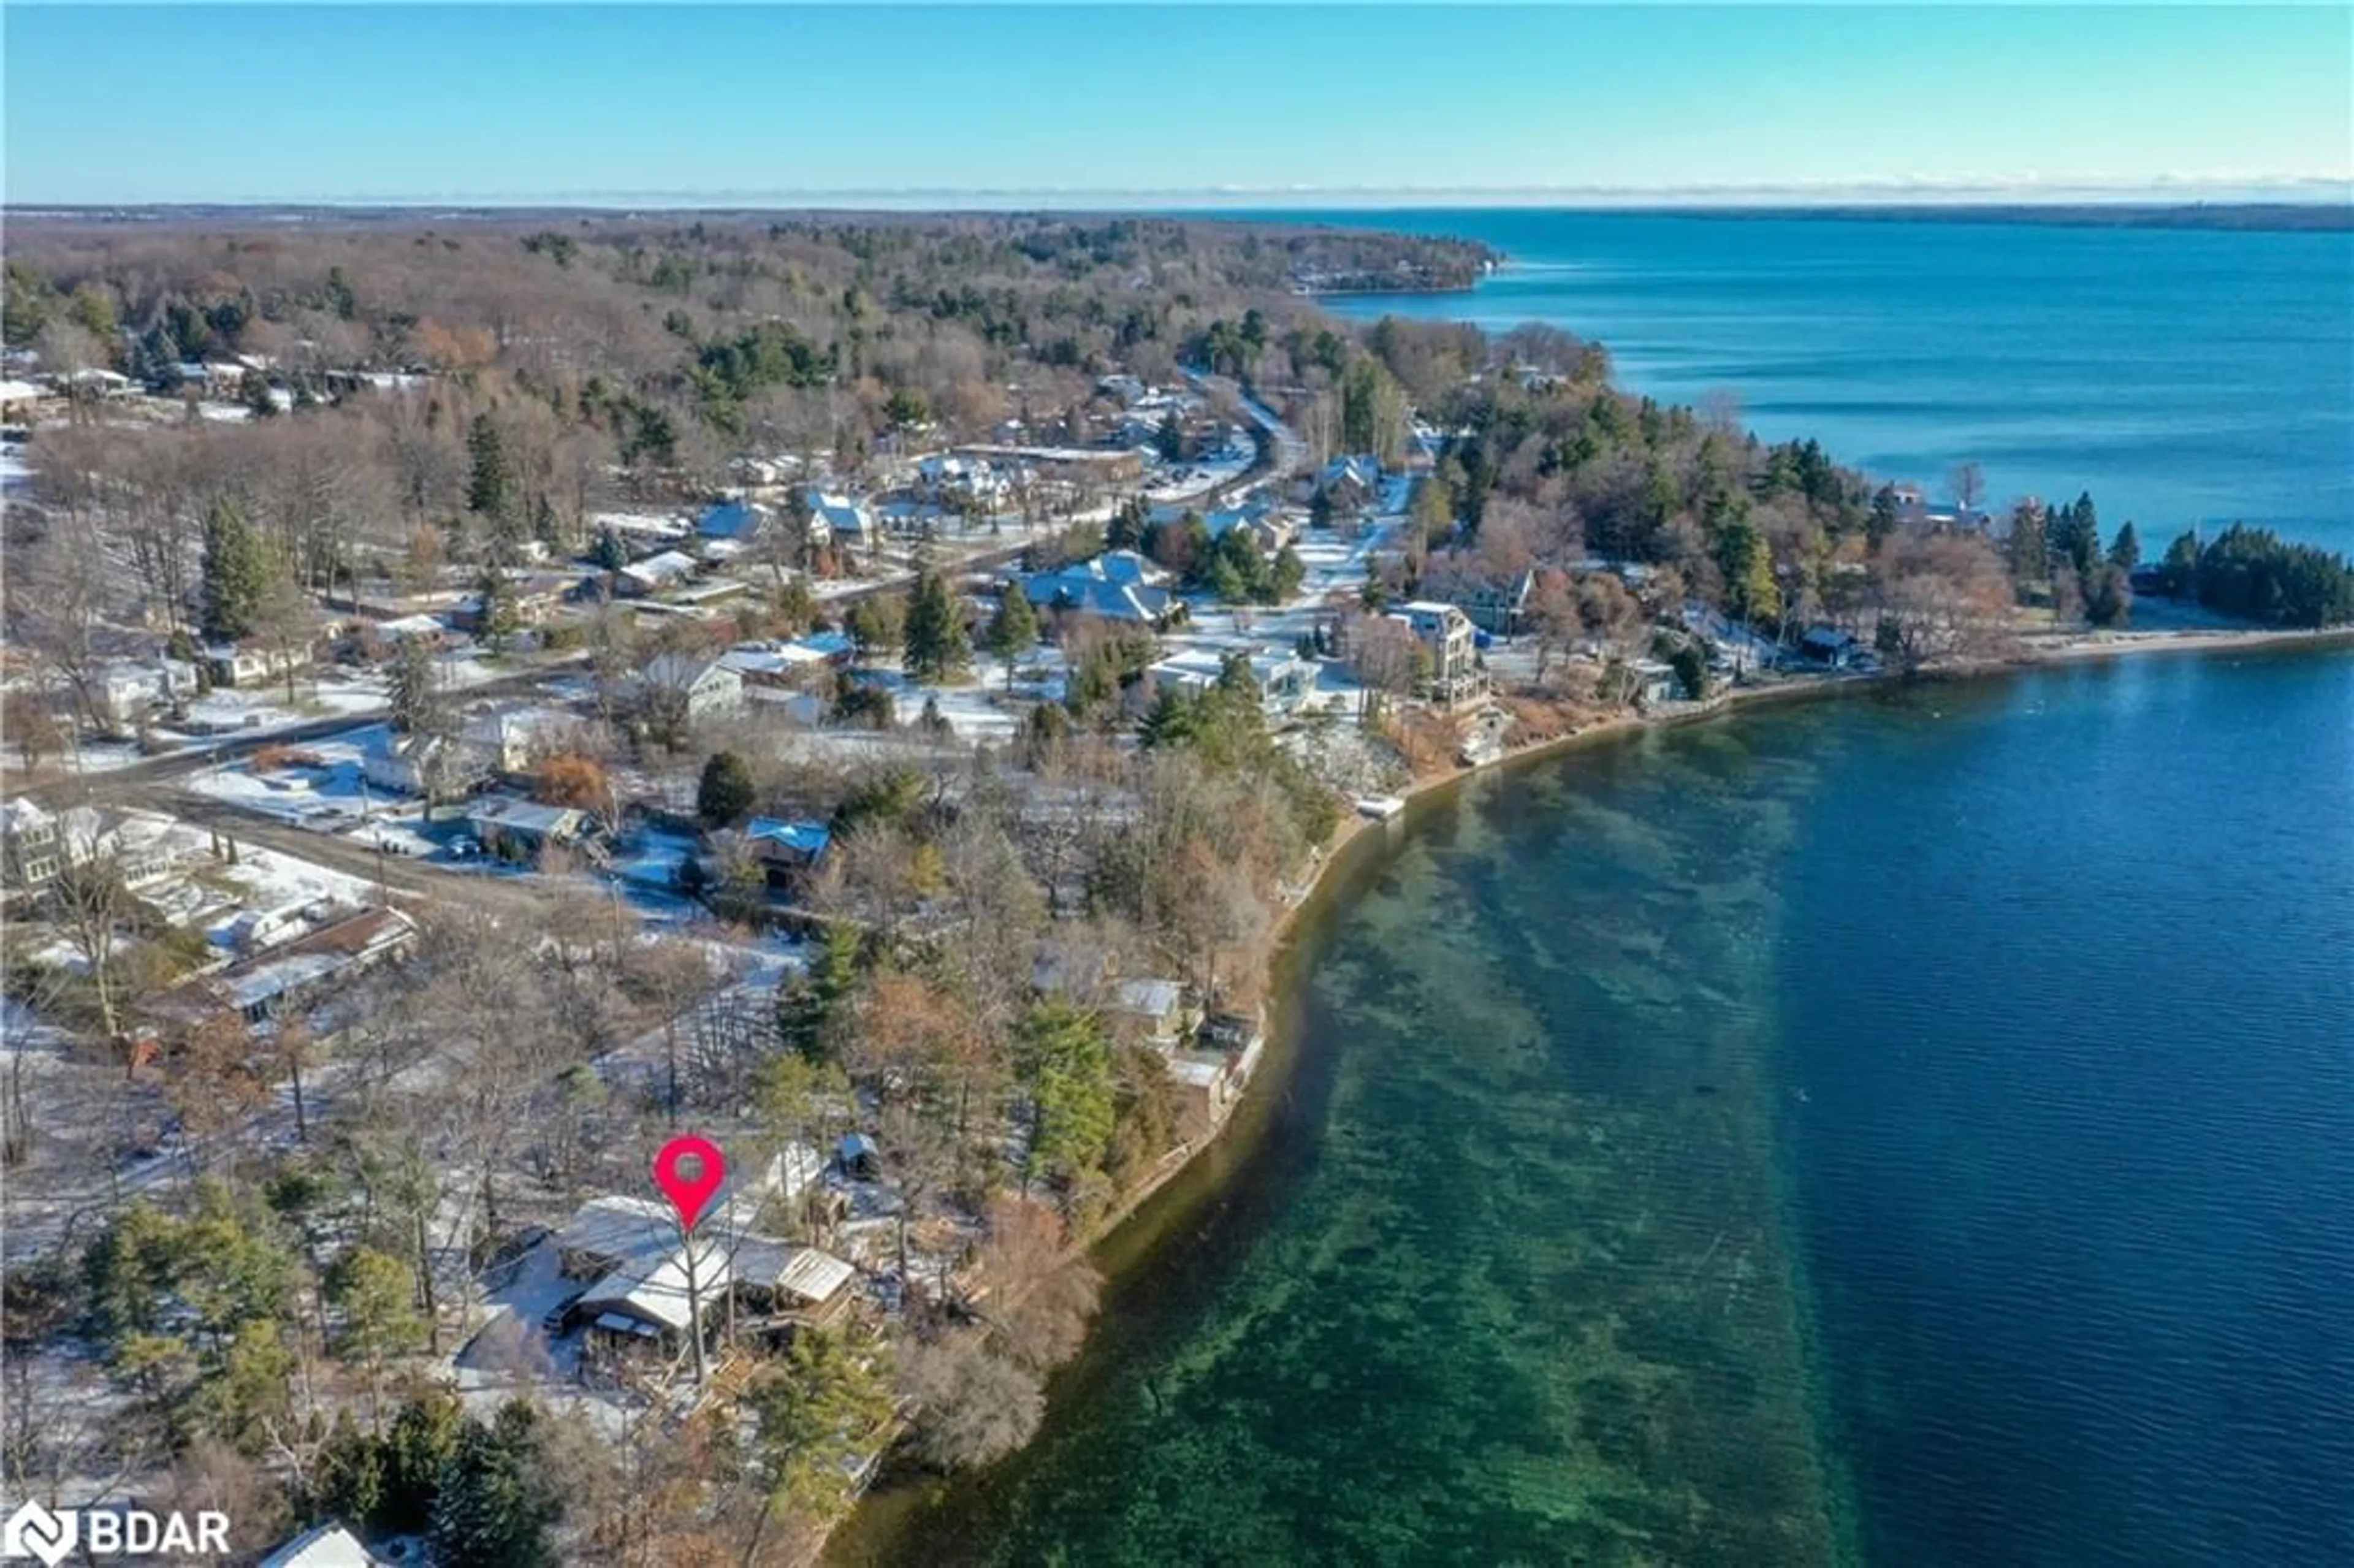 Lakeview for 2A Penetanguishene Rd, Barrie Ontario L4M 4R9